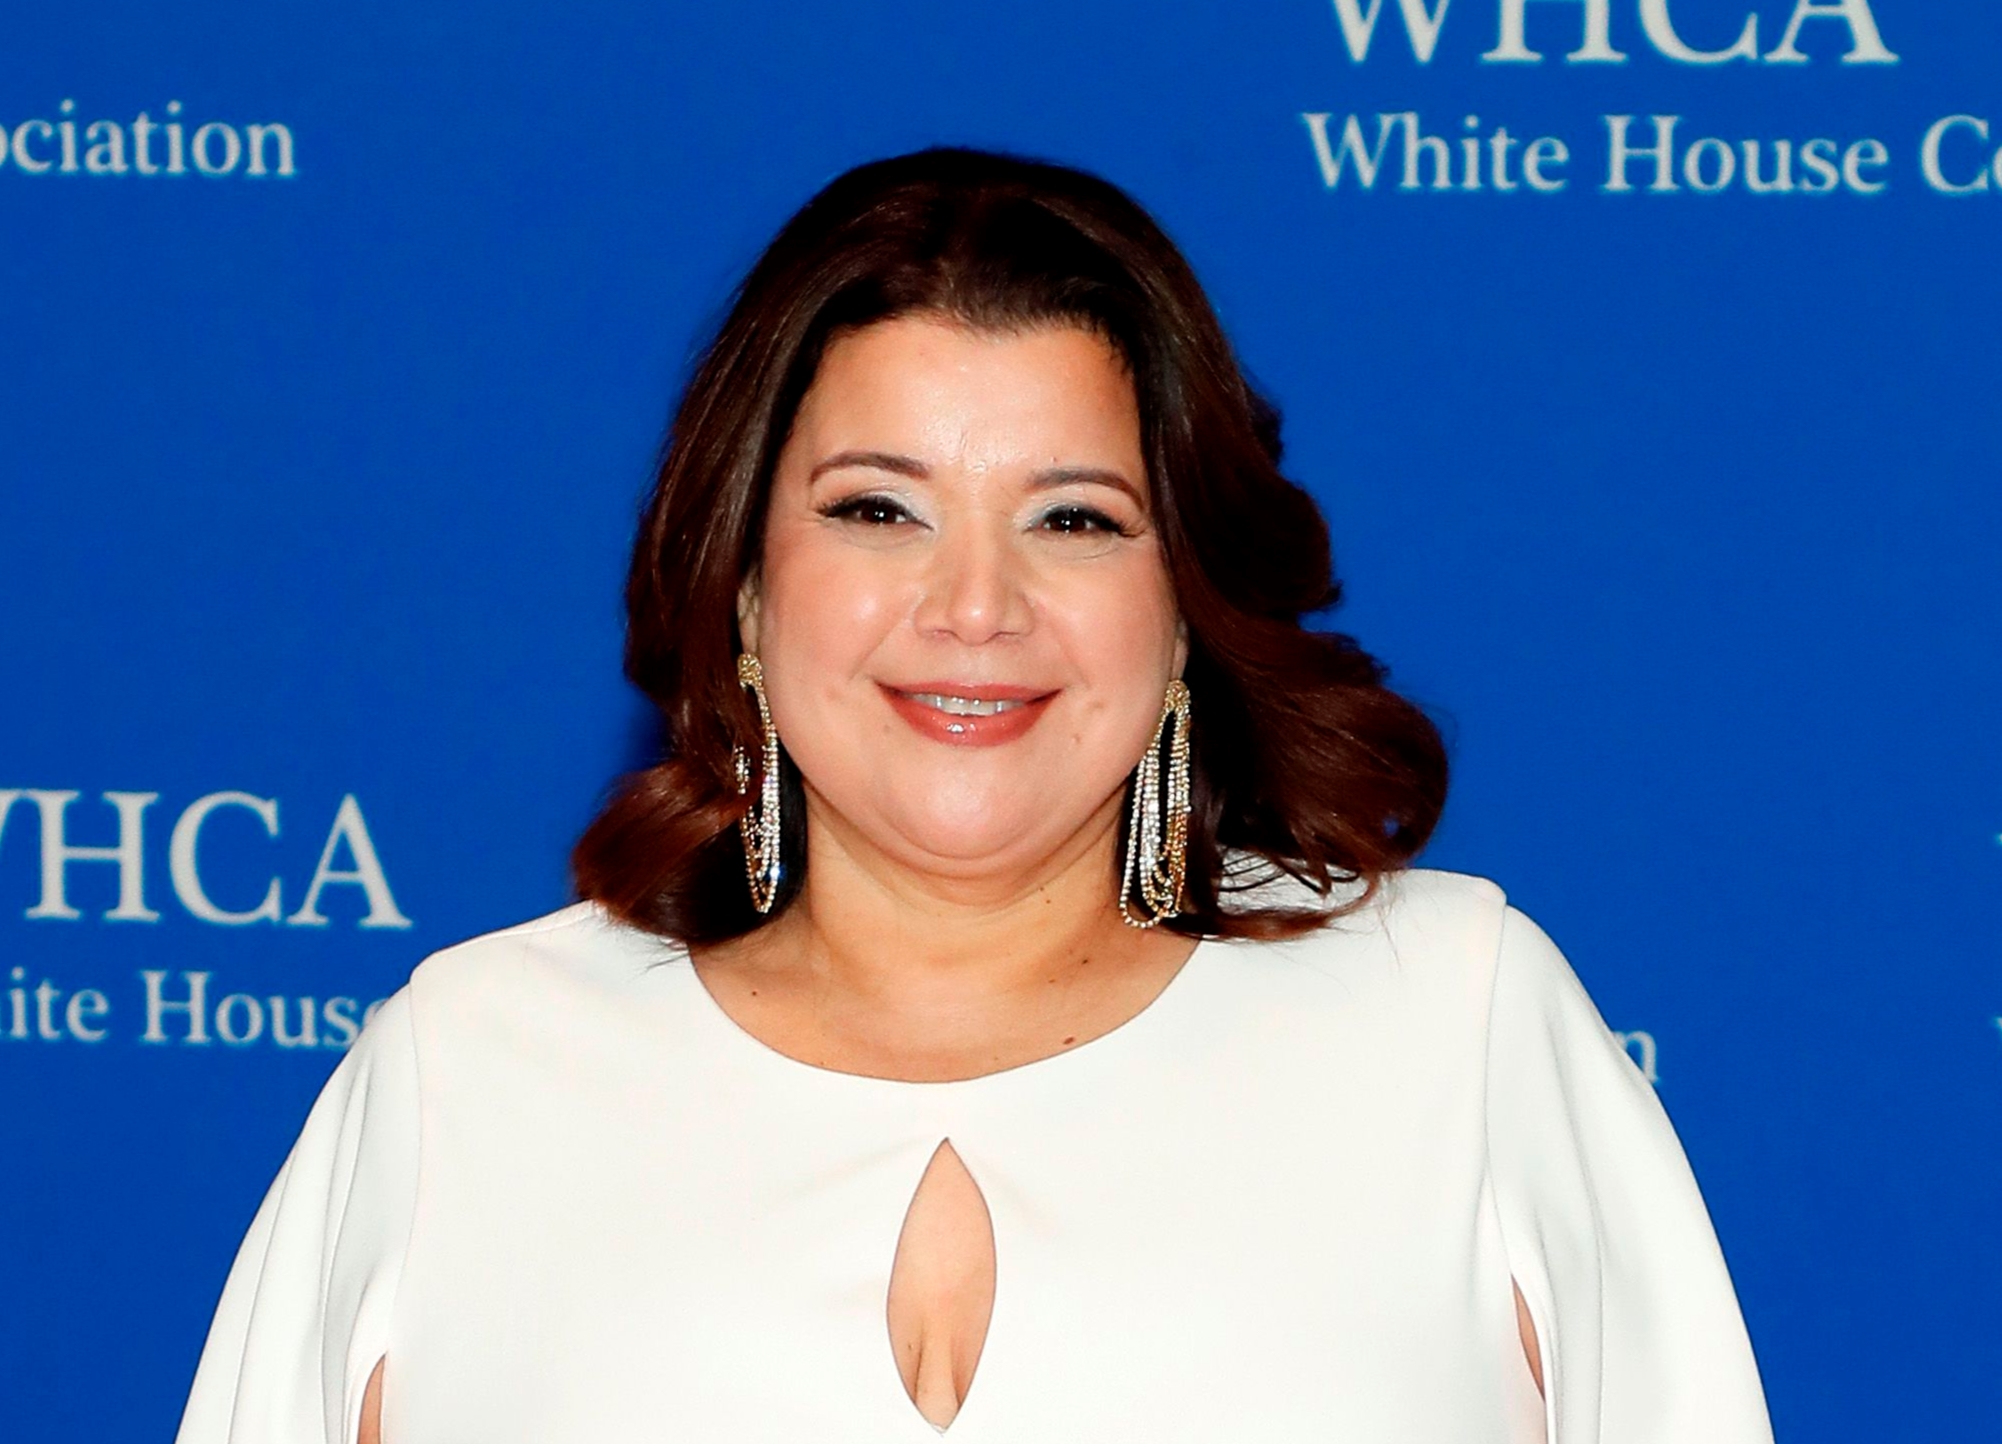 WATCH: Ana Navarro Calls Out Tucker Carlson for Spreading Conspiracy